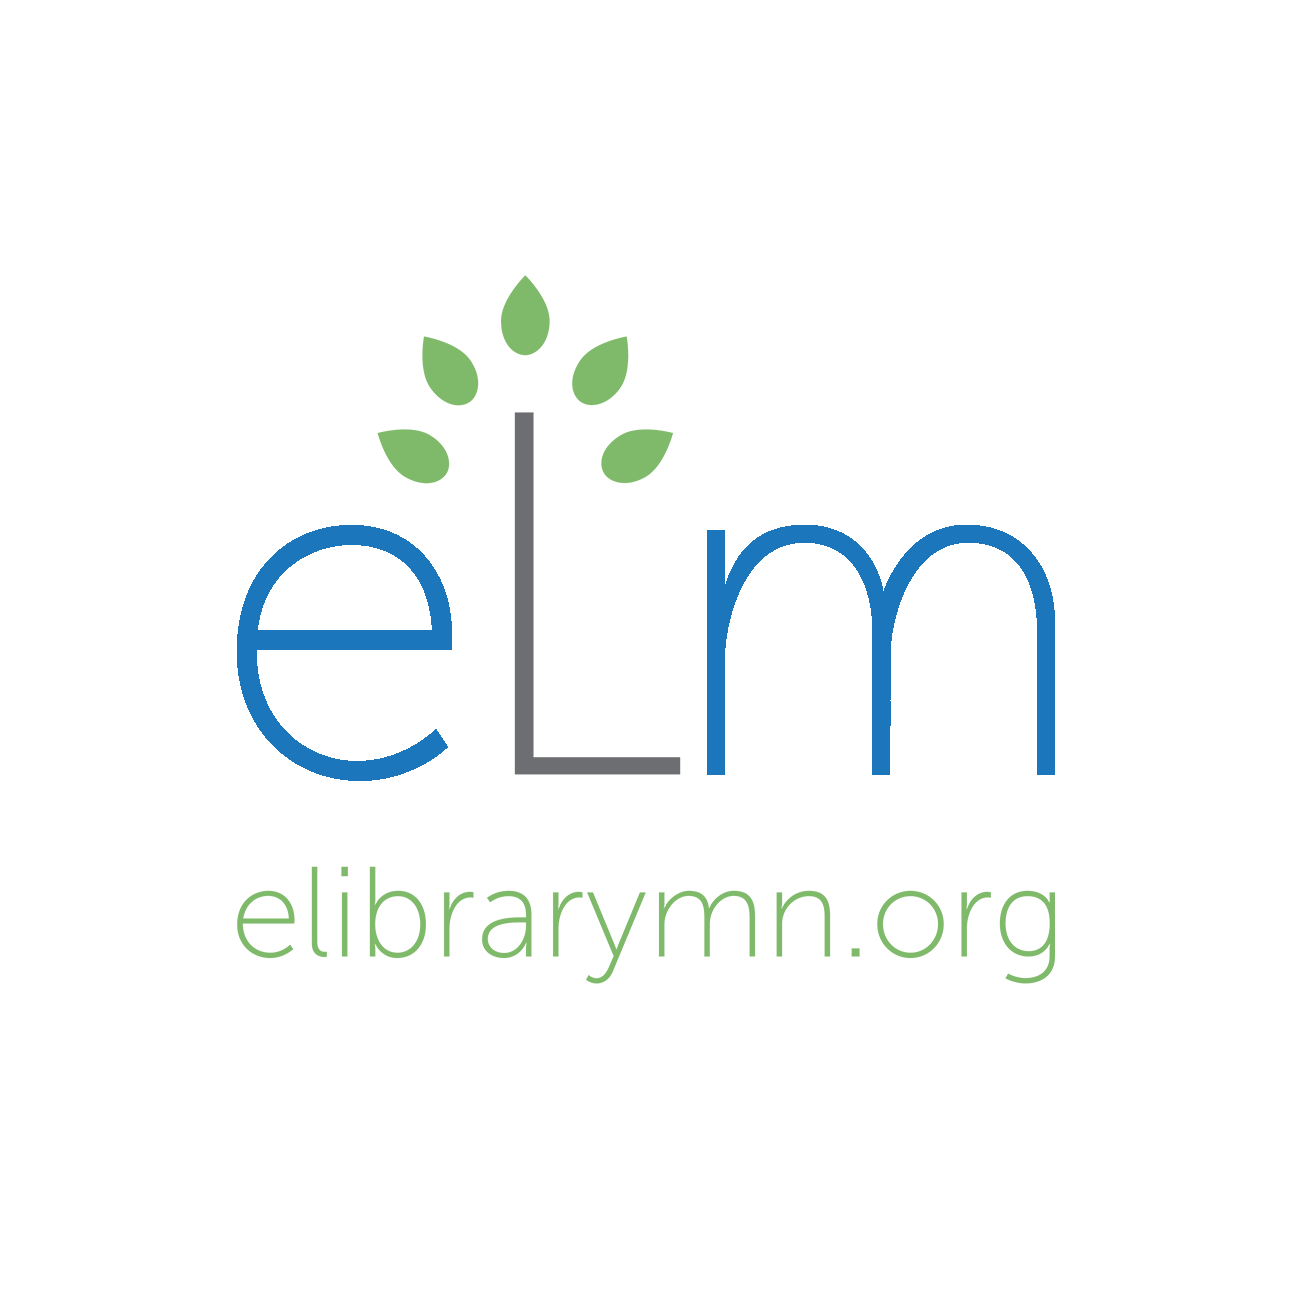 The eLibrary Minnesota wordmark, featuring green, blue and gray text.